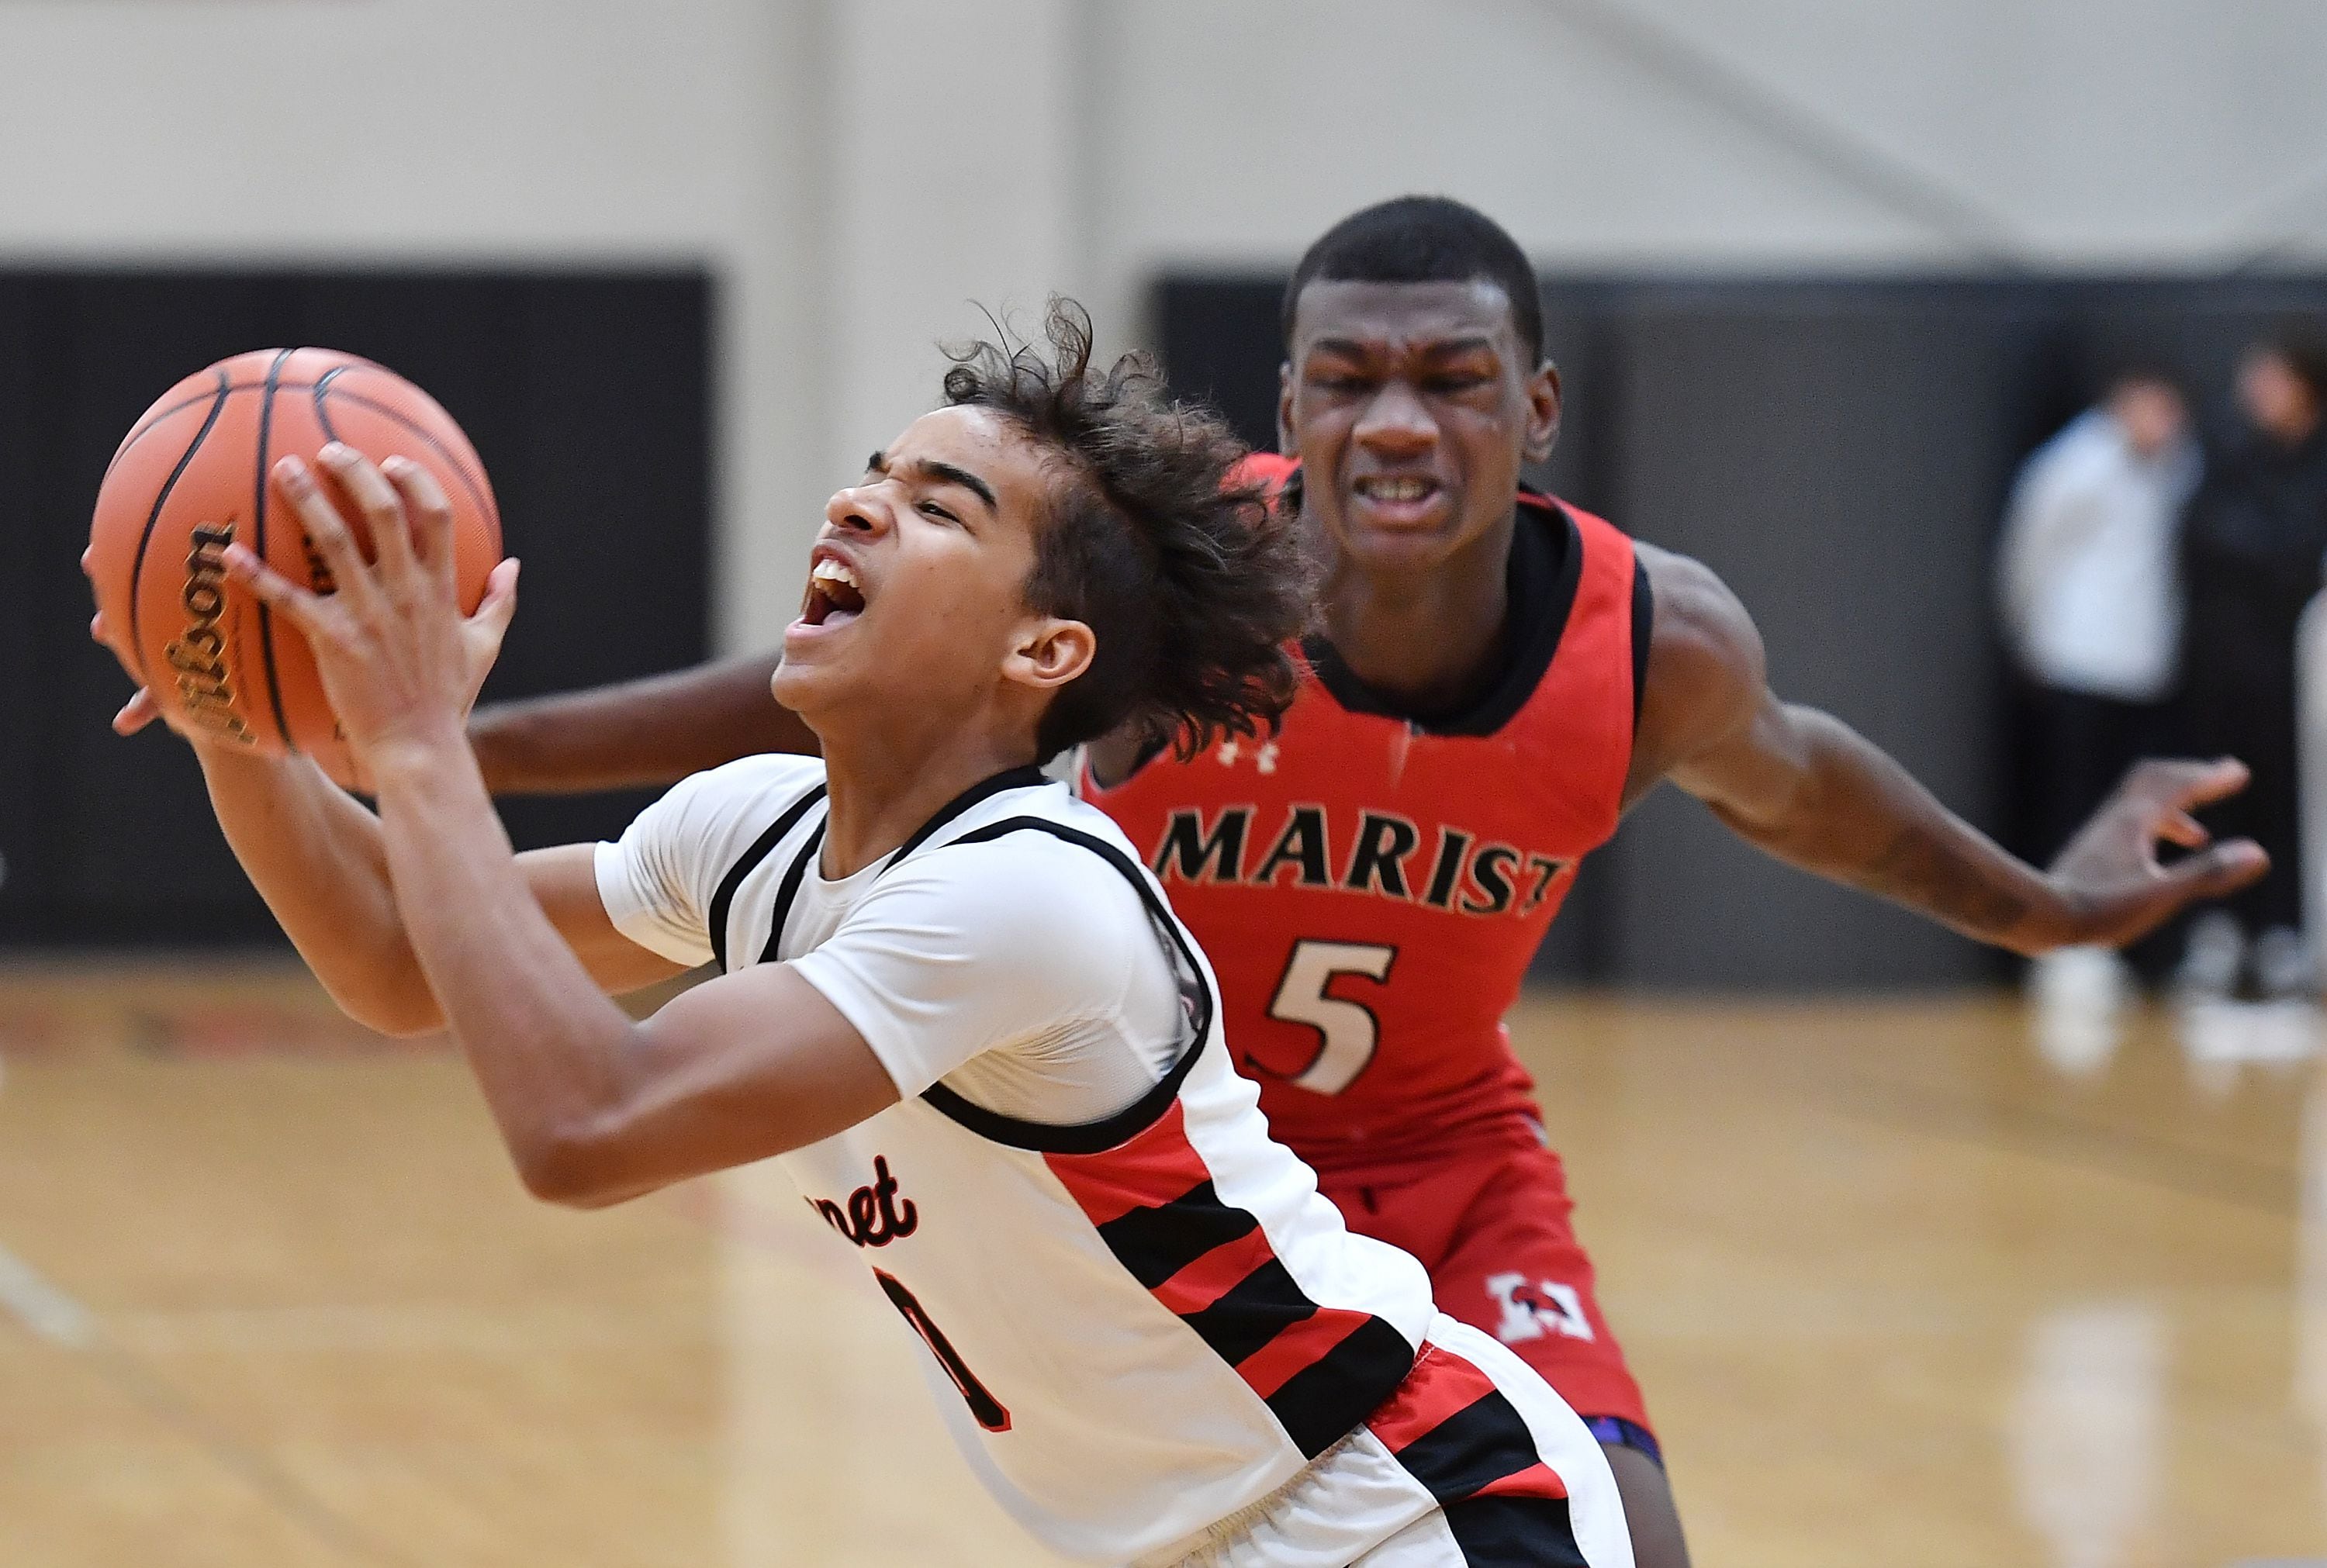 Benet's Blake Fagbemi reacts to contact from Marist's Stephen Brown (5) during a game on Dec. 15, 2023 at Benet Academy in Lisle.